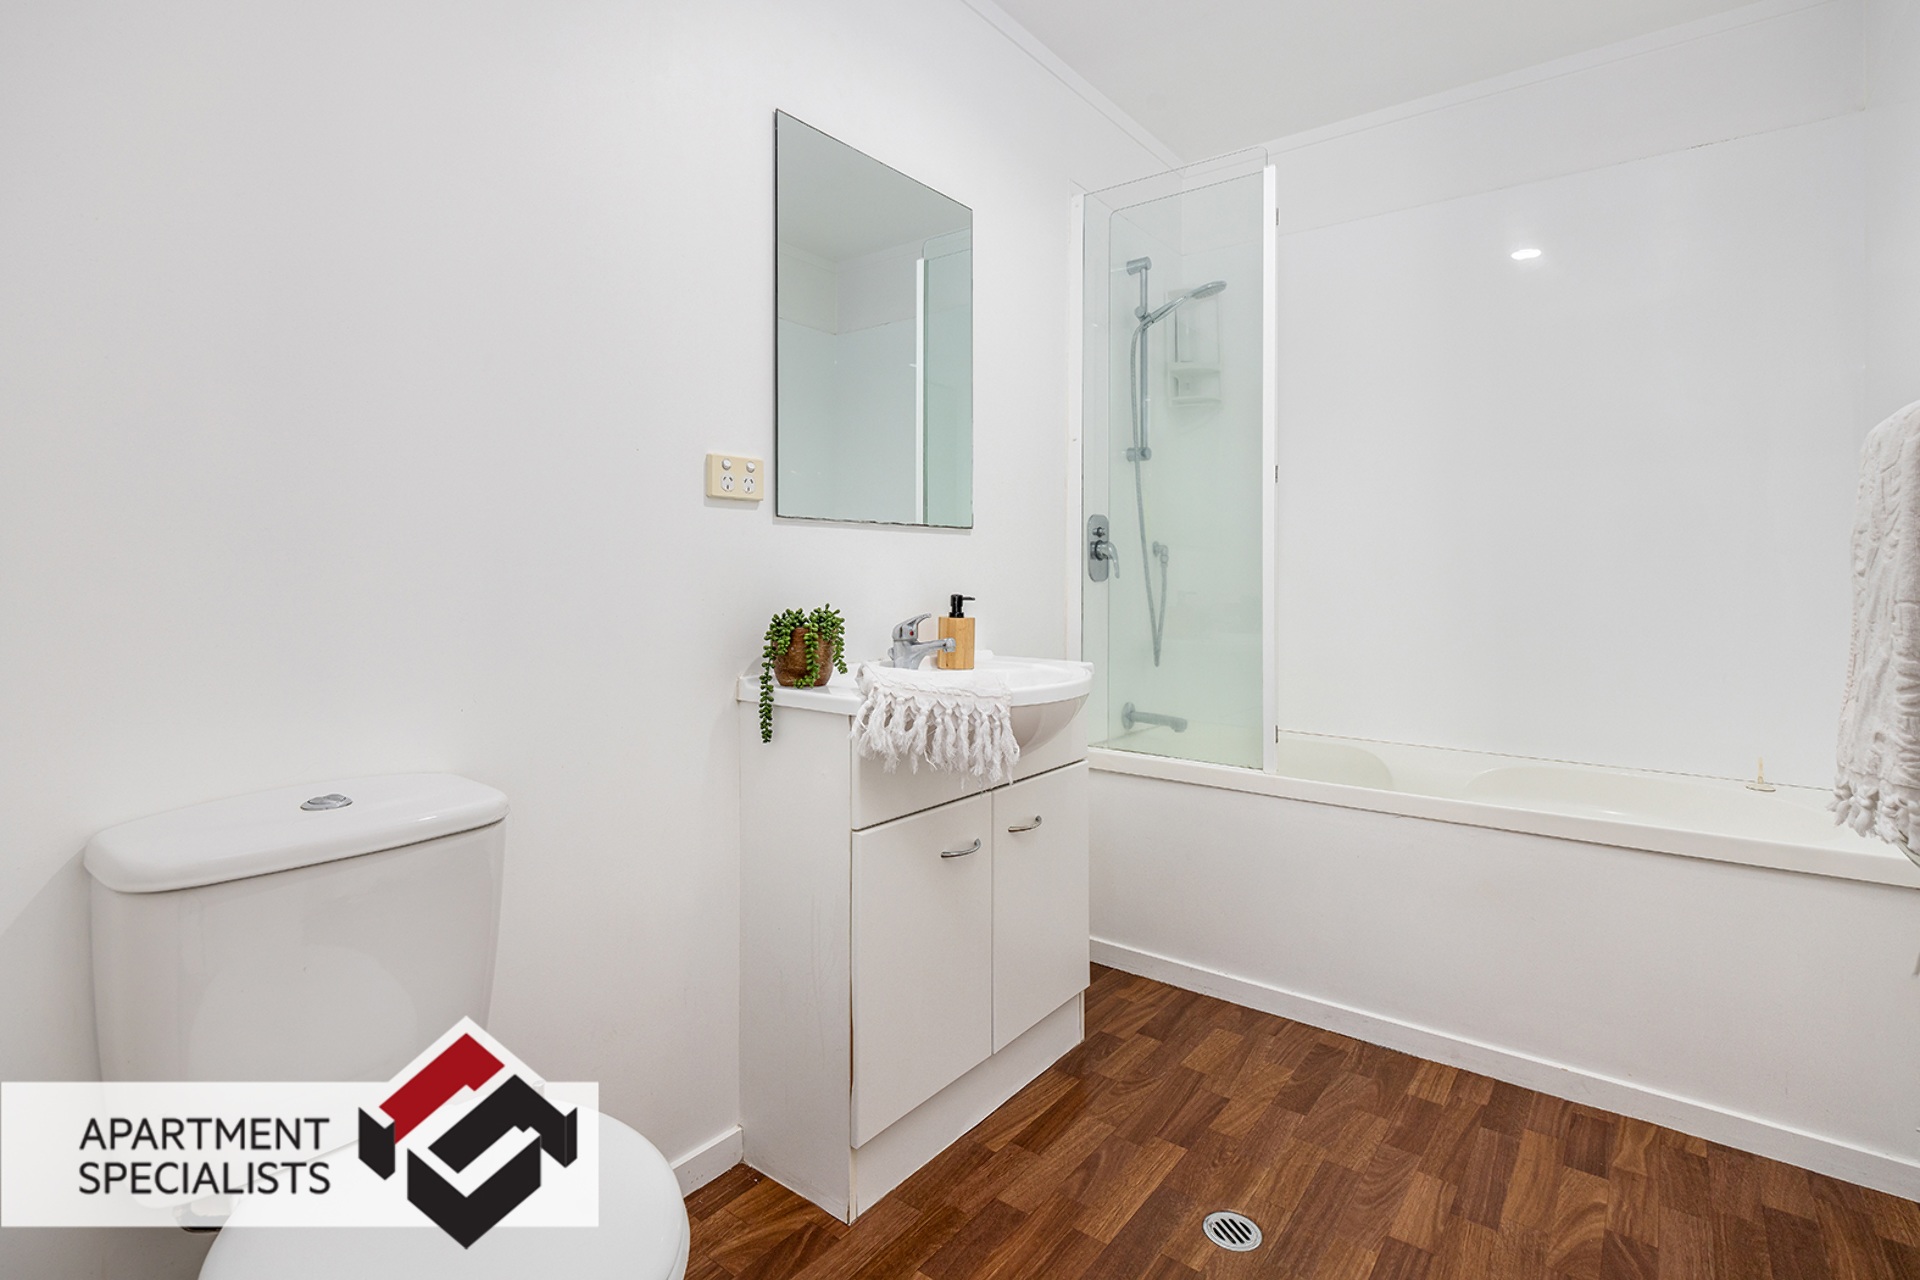 12 | 26 Morningside Drive, Morningside | Apartment Specialists